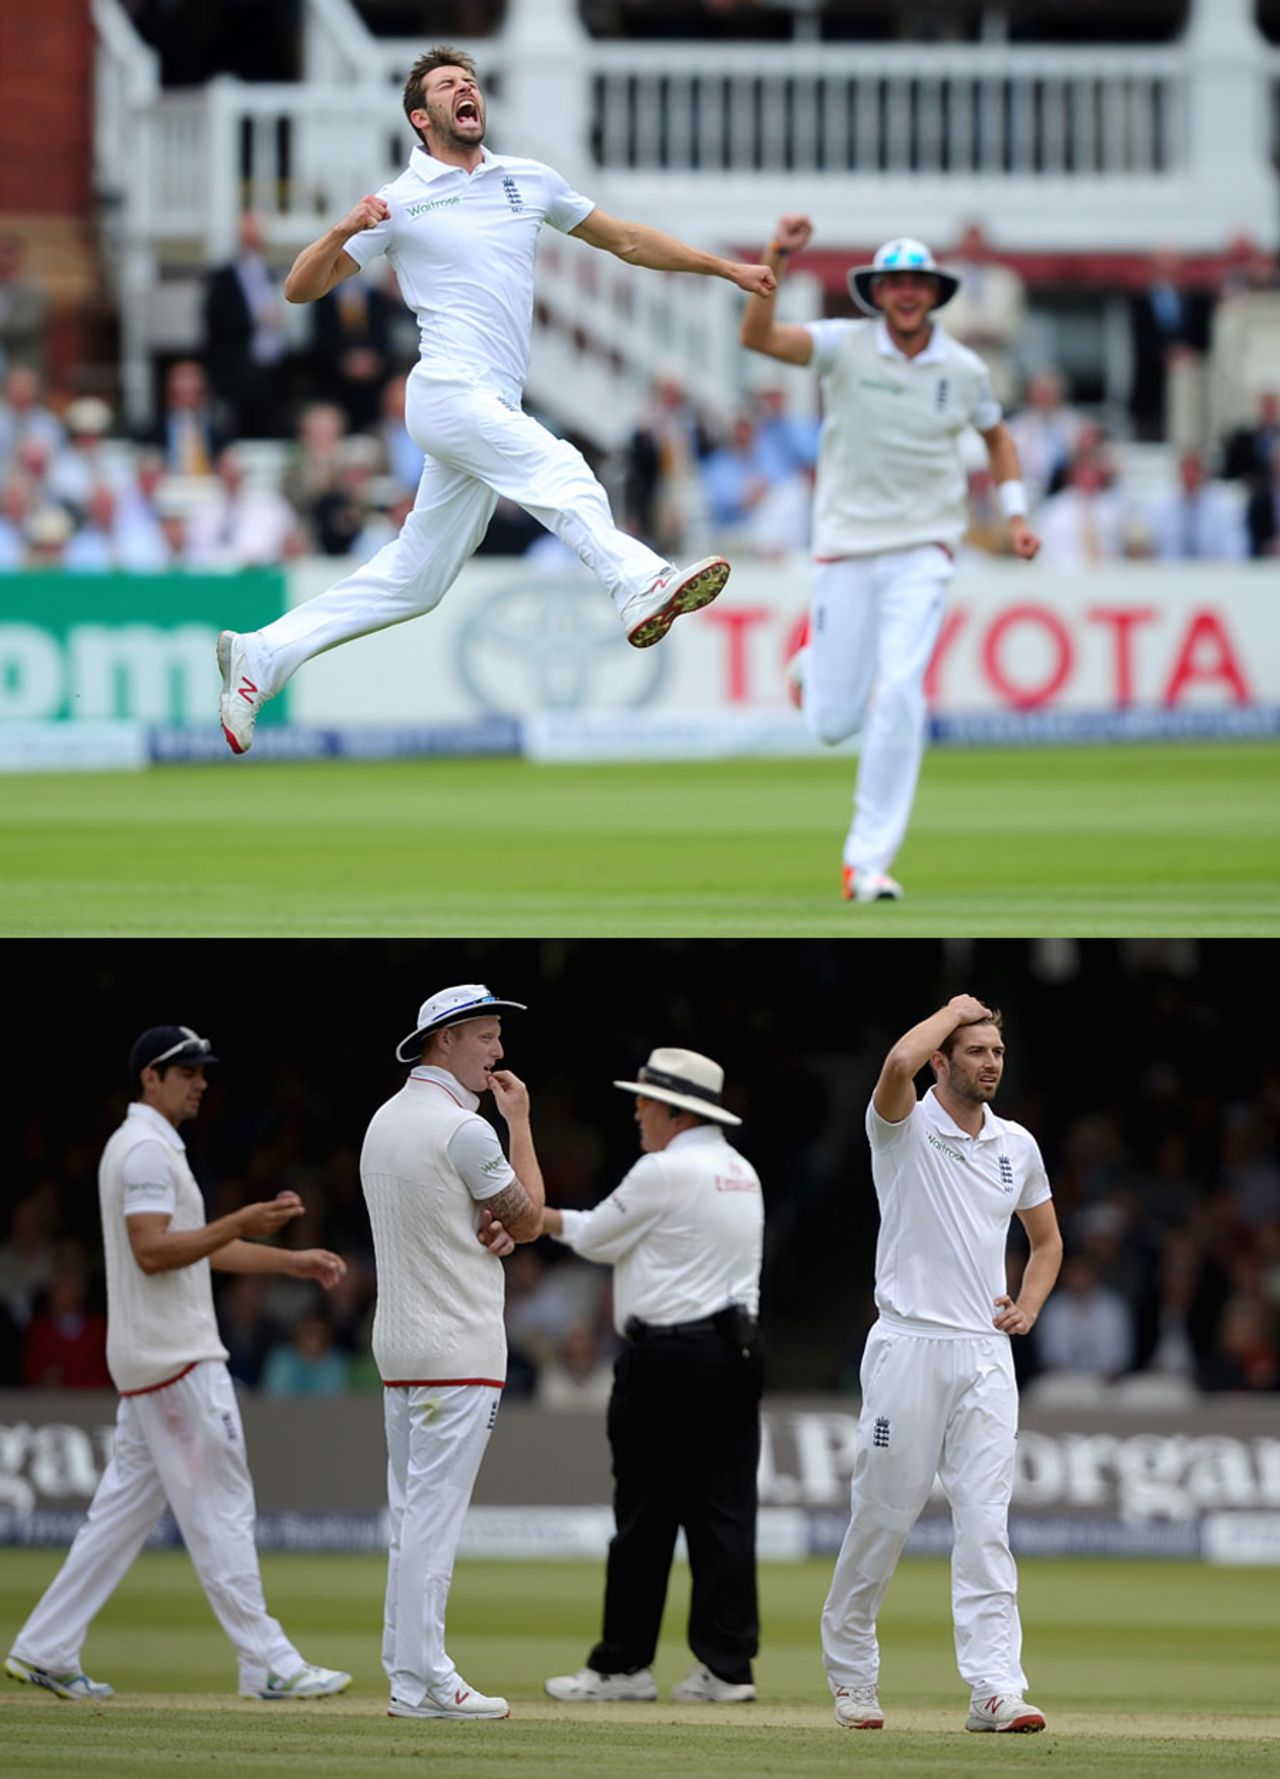 Mark Wood thought he had his first Test wicket, but had overstepped, England v New Zealand, 1st Investec Test, Lord's, 2nd day, May 22, 2015